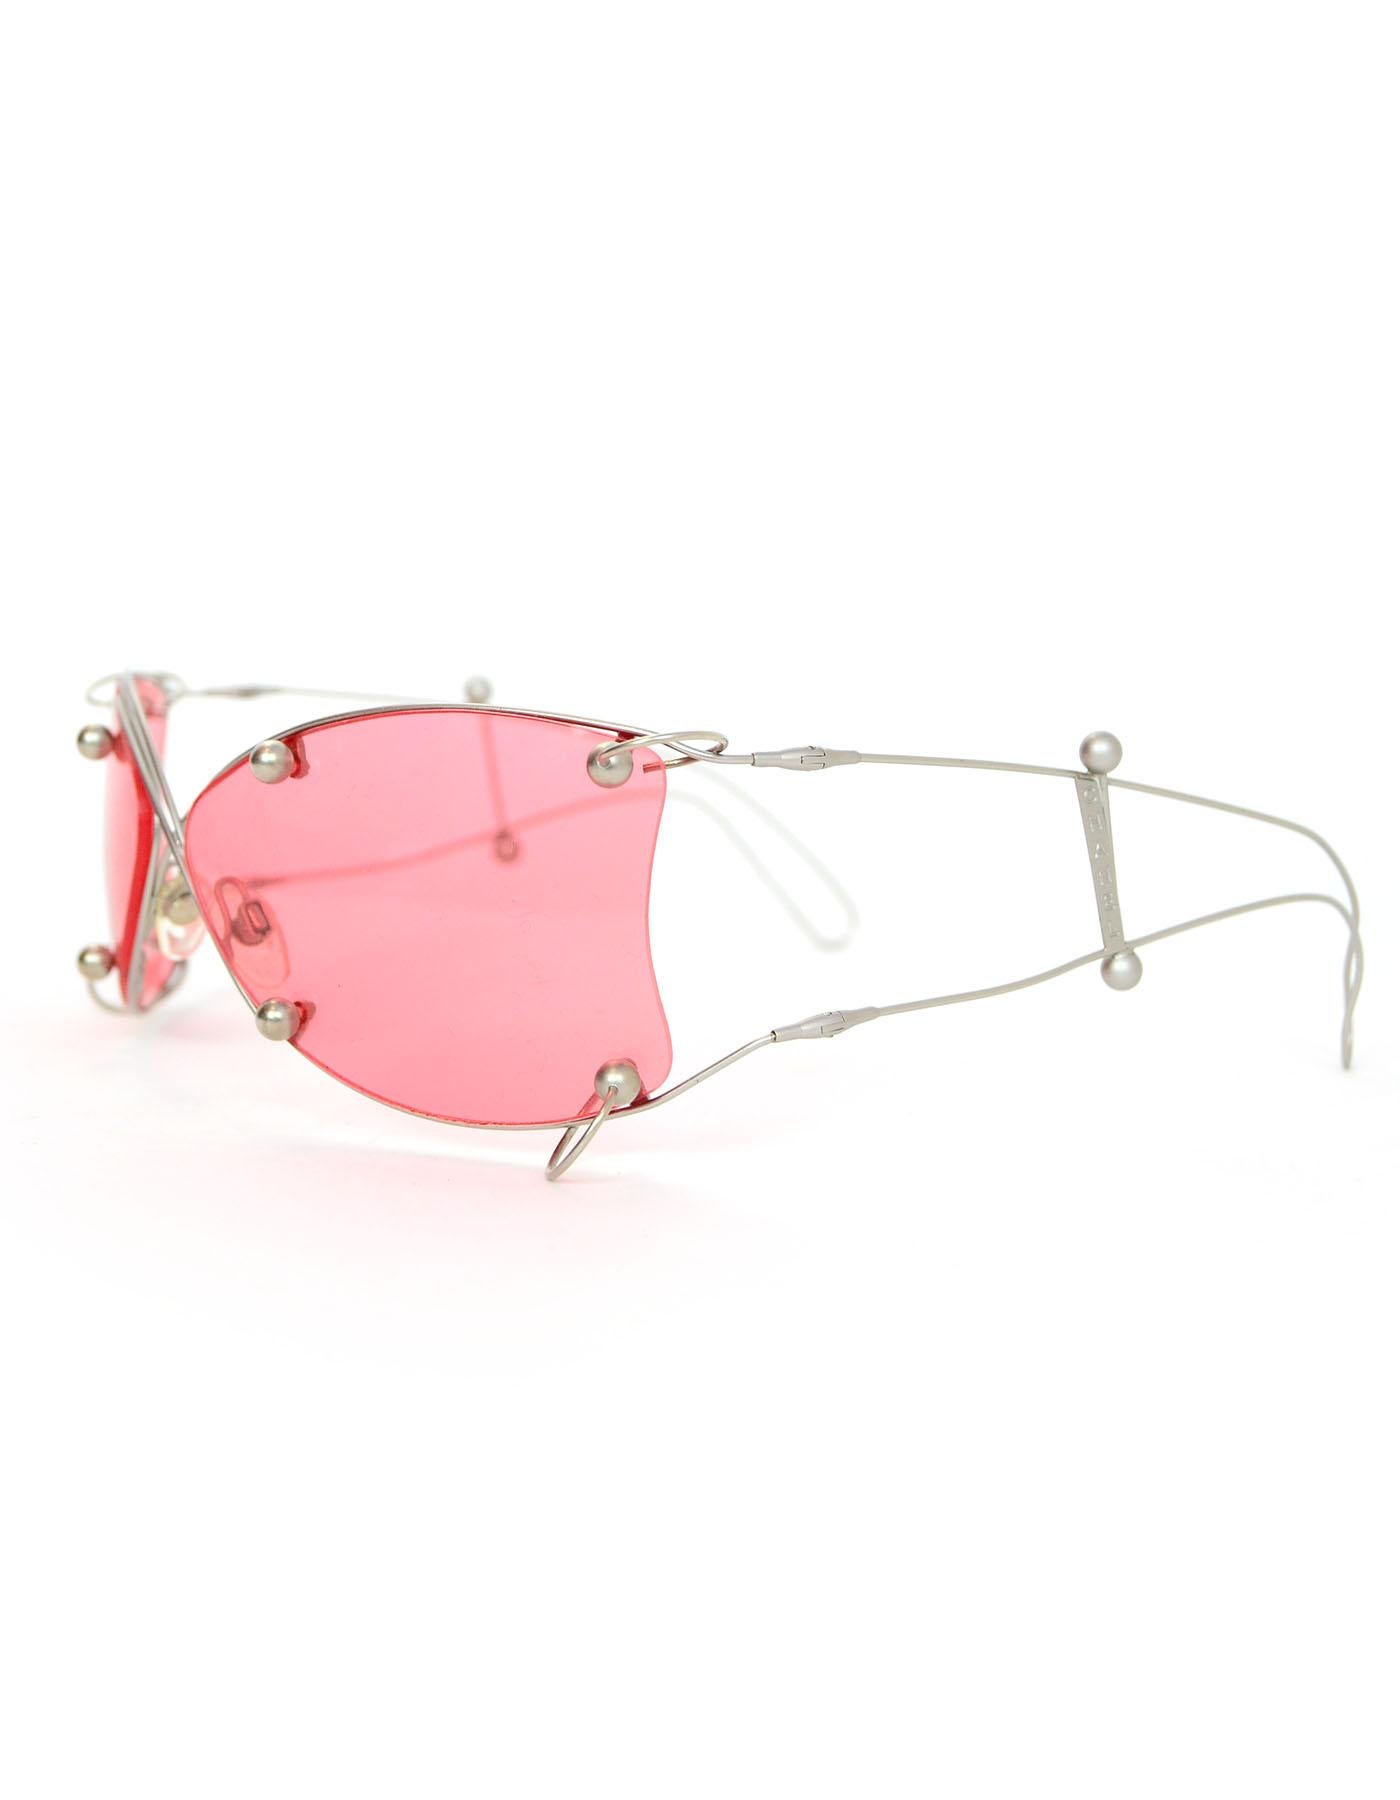 Chanel Wire-Frame and Pierced Pink Lens Sunglasses

Made In: Italy
Color: Silver, pink
Materials: Metal, glass
Overall Condition: Very good pre-owned condition with the exception of some scratches at lenses and soiling at nose pads
Included: Chanel